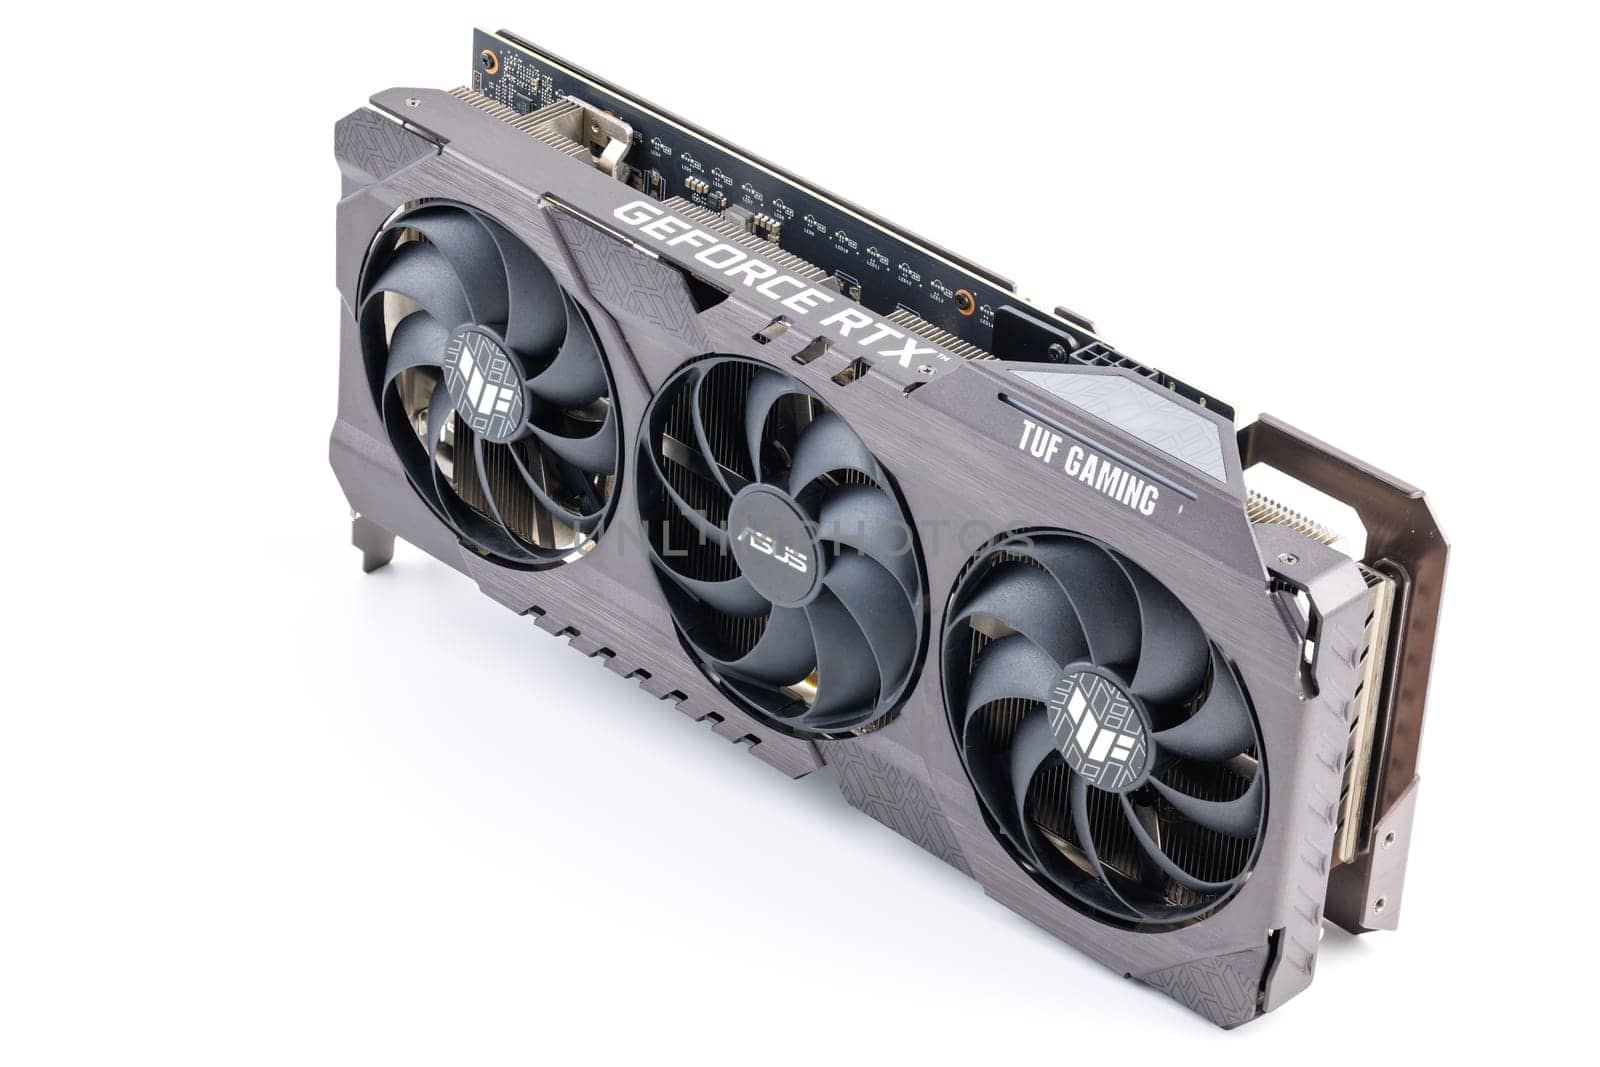 NVIDIA RTX 3060 OC 12g TUF Gaming graphics card on white background. Tula, Russia - July 26, 2022